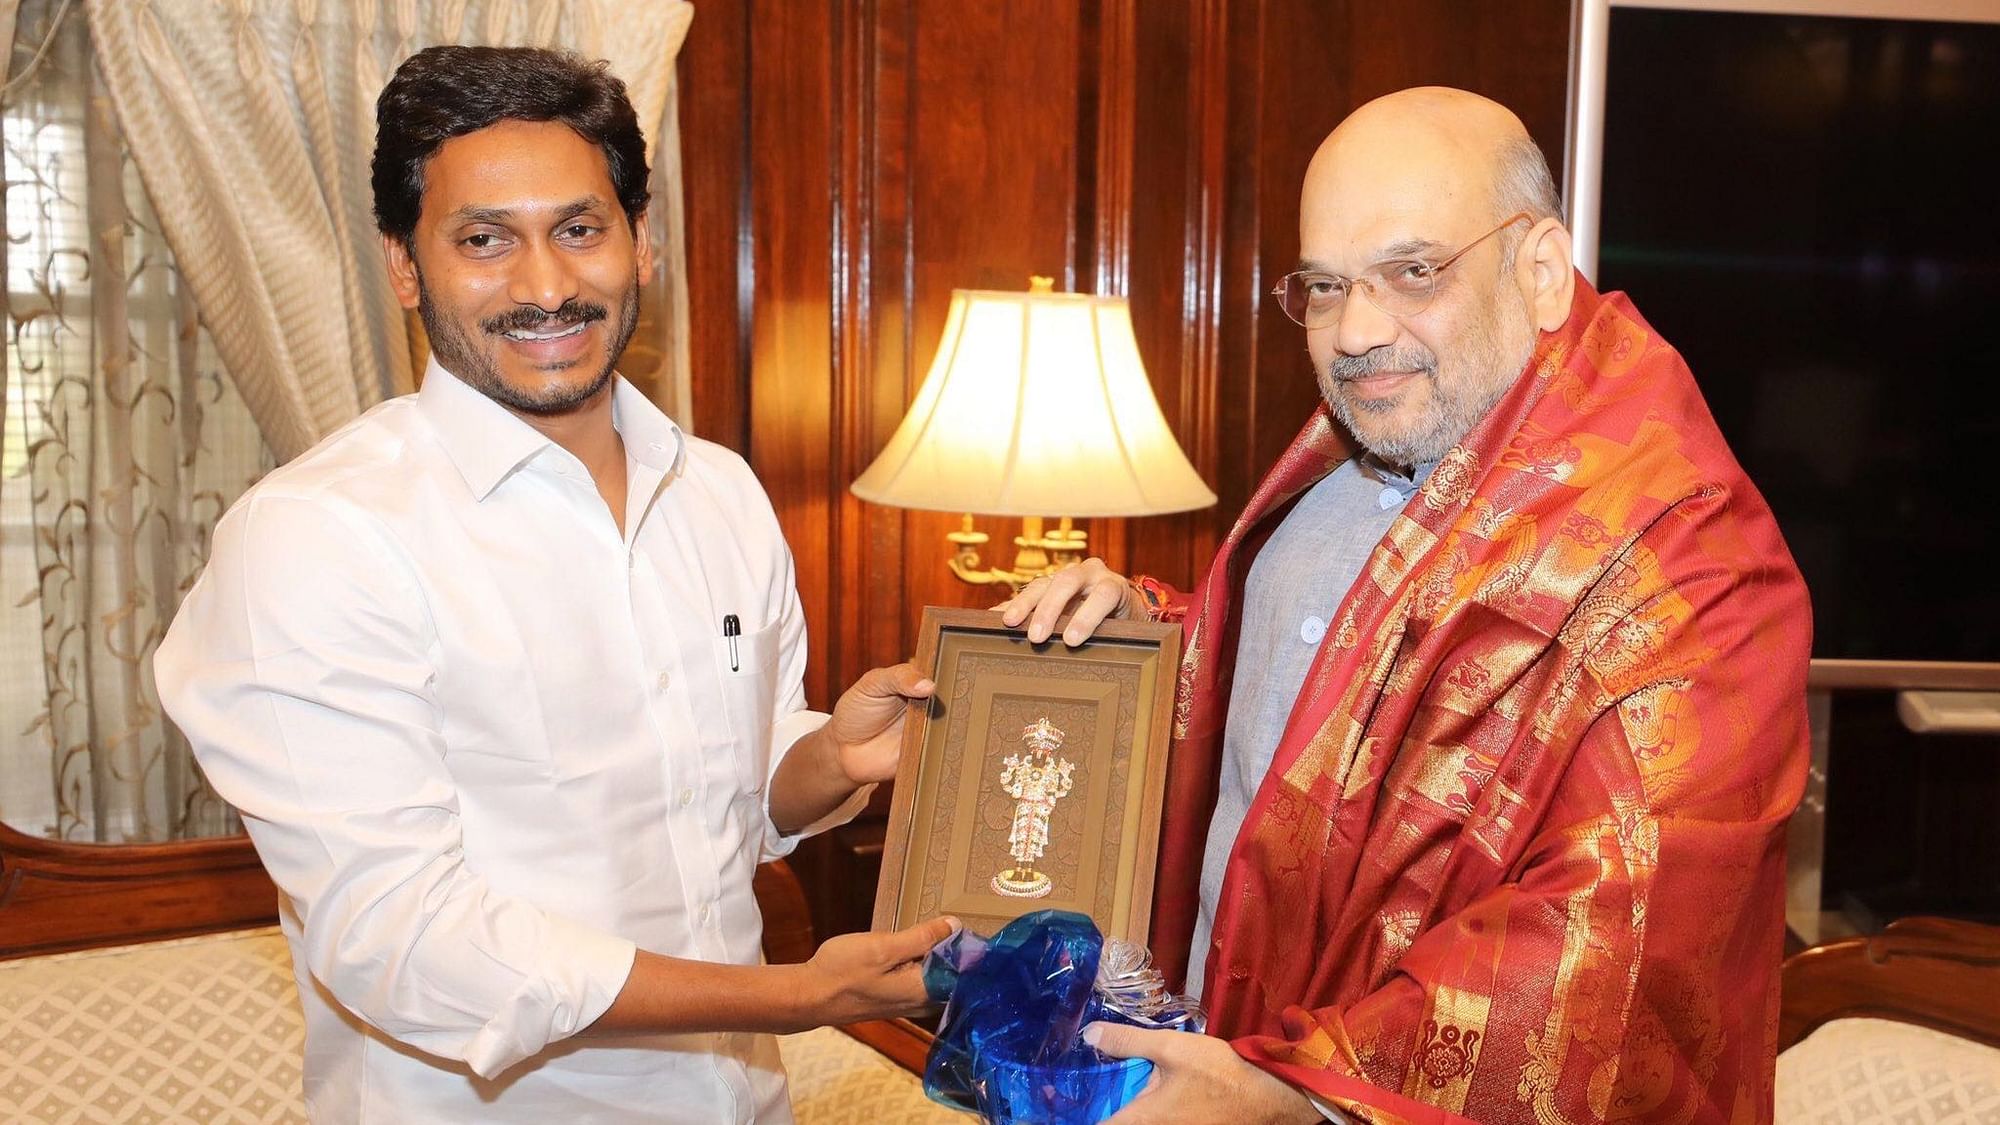  Andhra Pradesh Chief Minister YS Jagan Mohan Reddy meets Union Home Minister Amit Shah, in New Delhi on 14 June 2019.&nbsp;